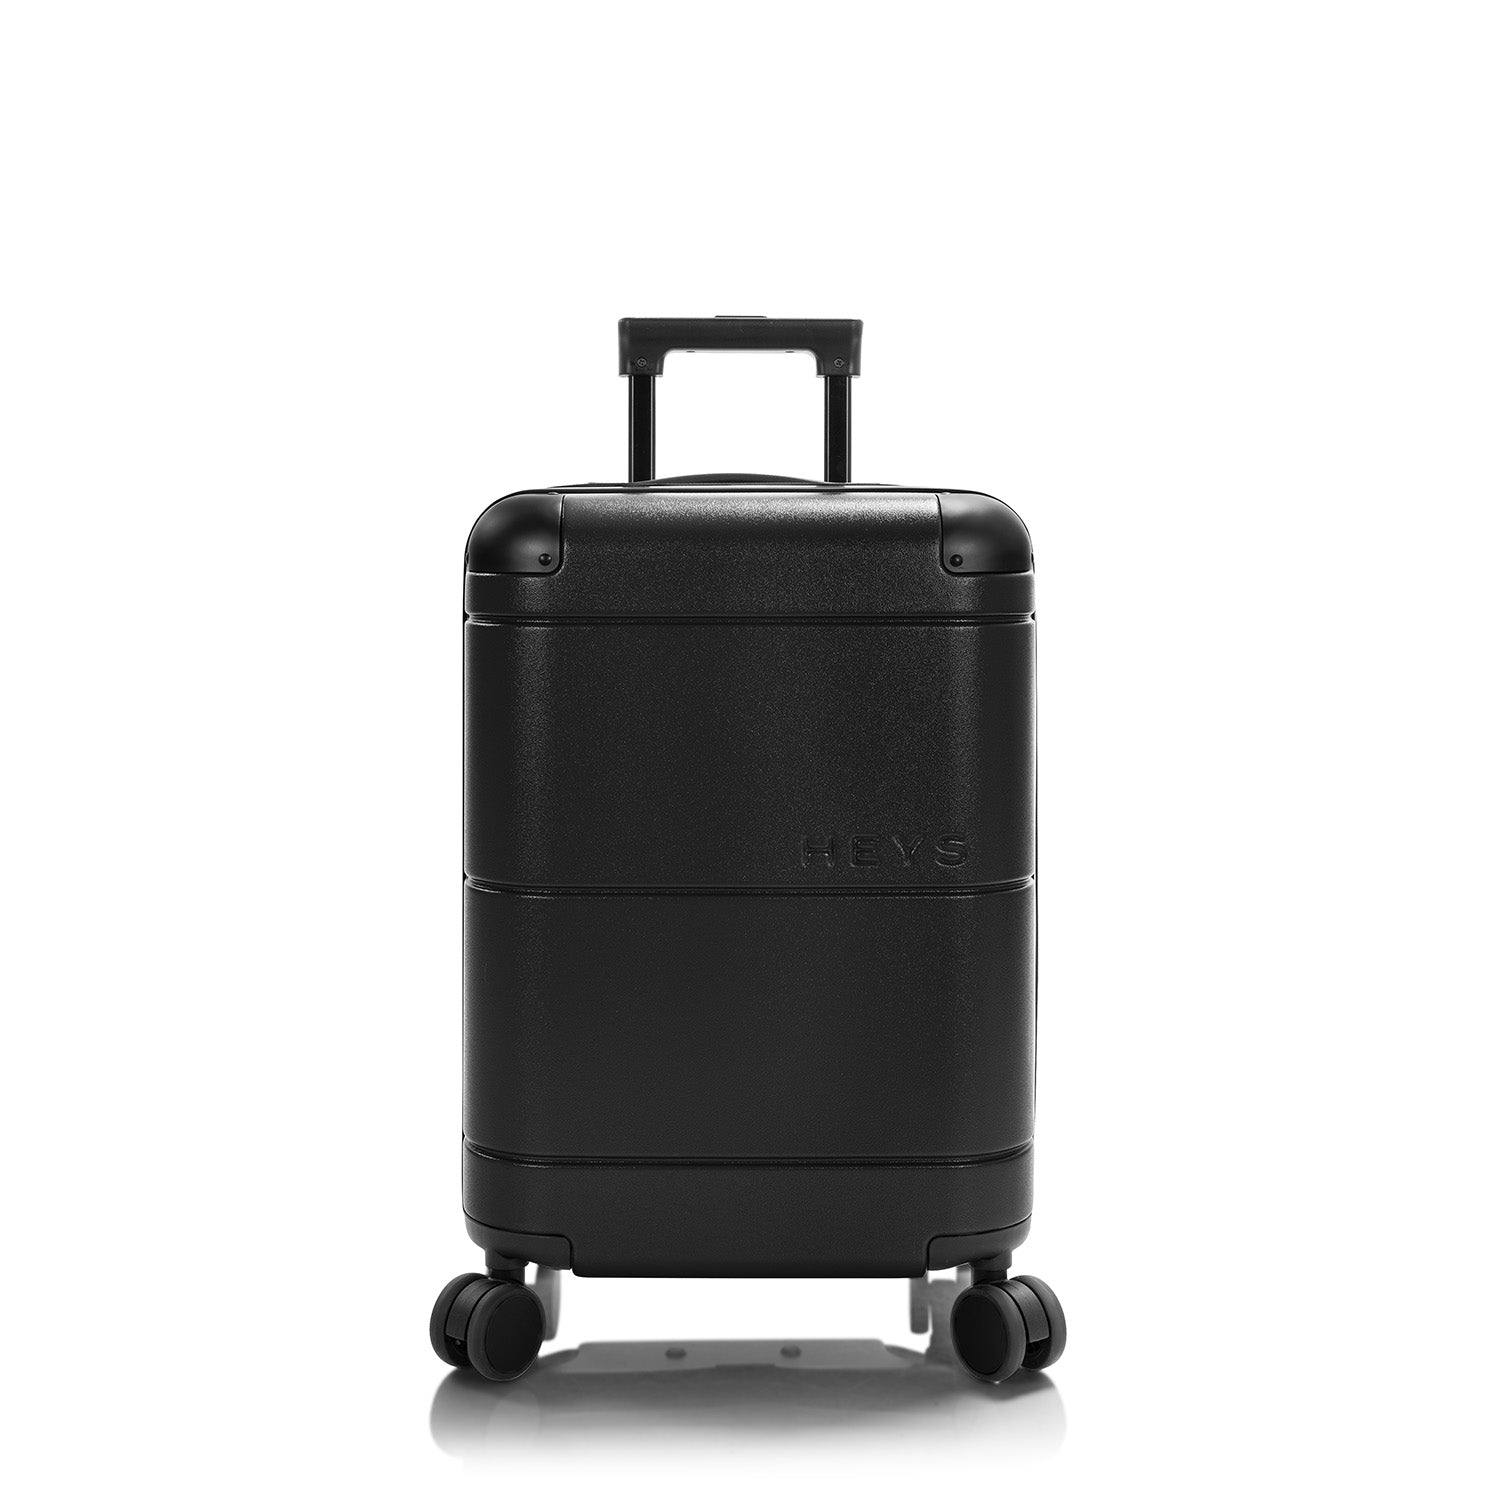 Zen 21 Inch Carry-On Luggage